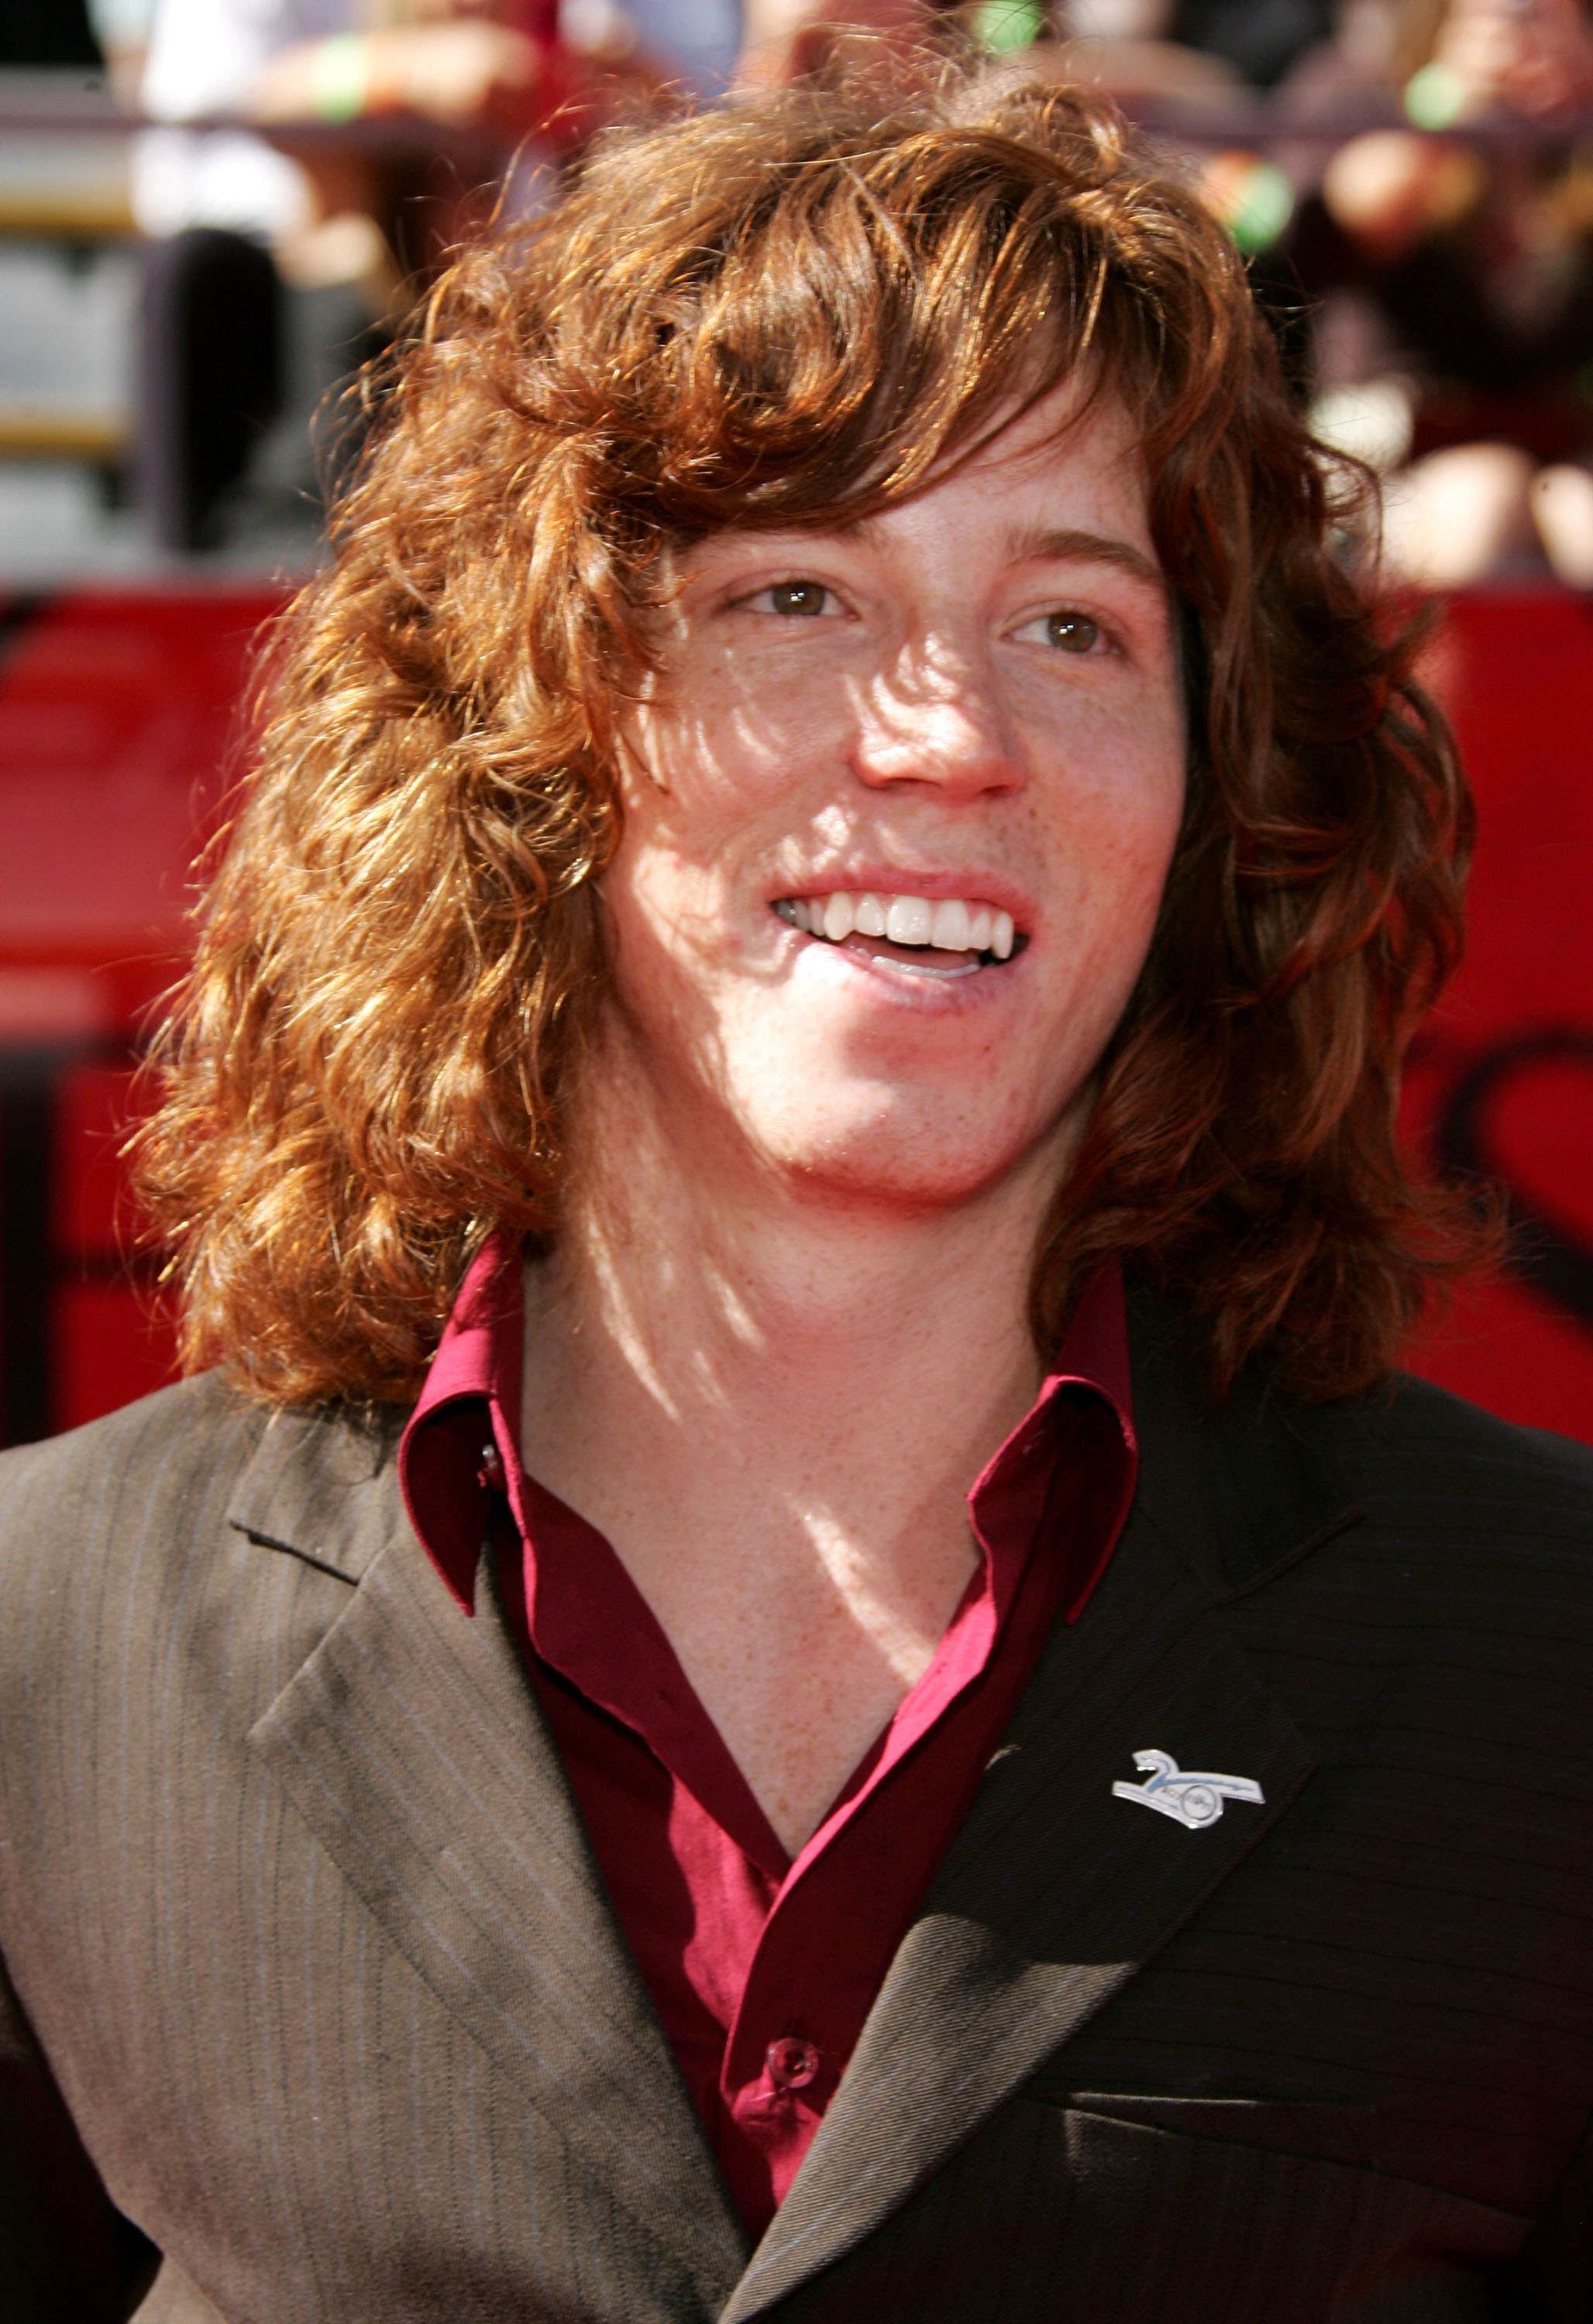 Pro-Snowboarder Shaun White Talks About His Collaboration with the